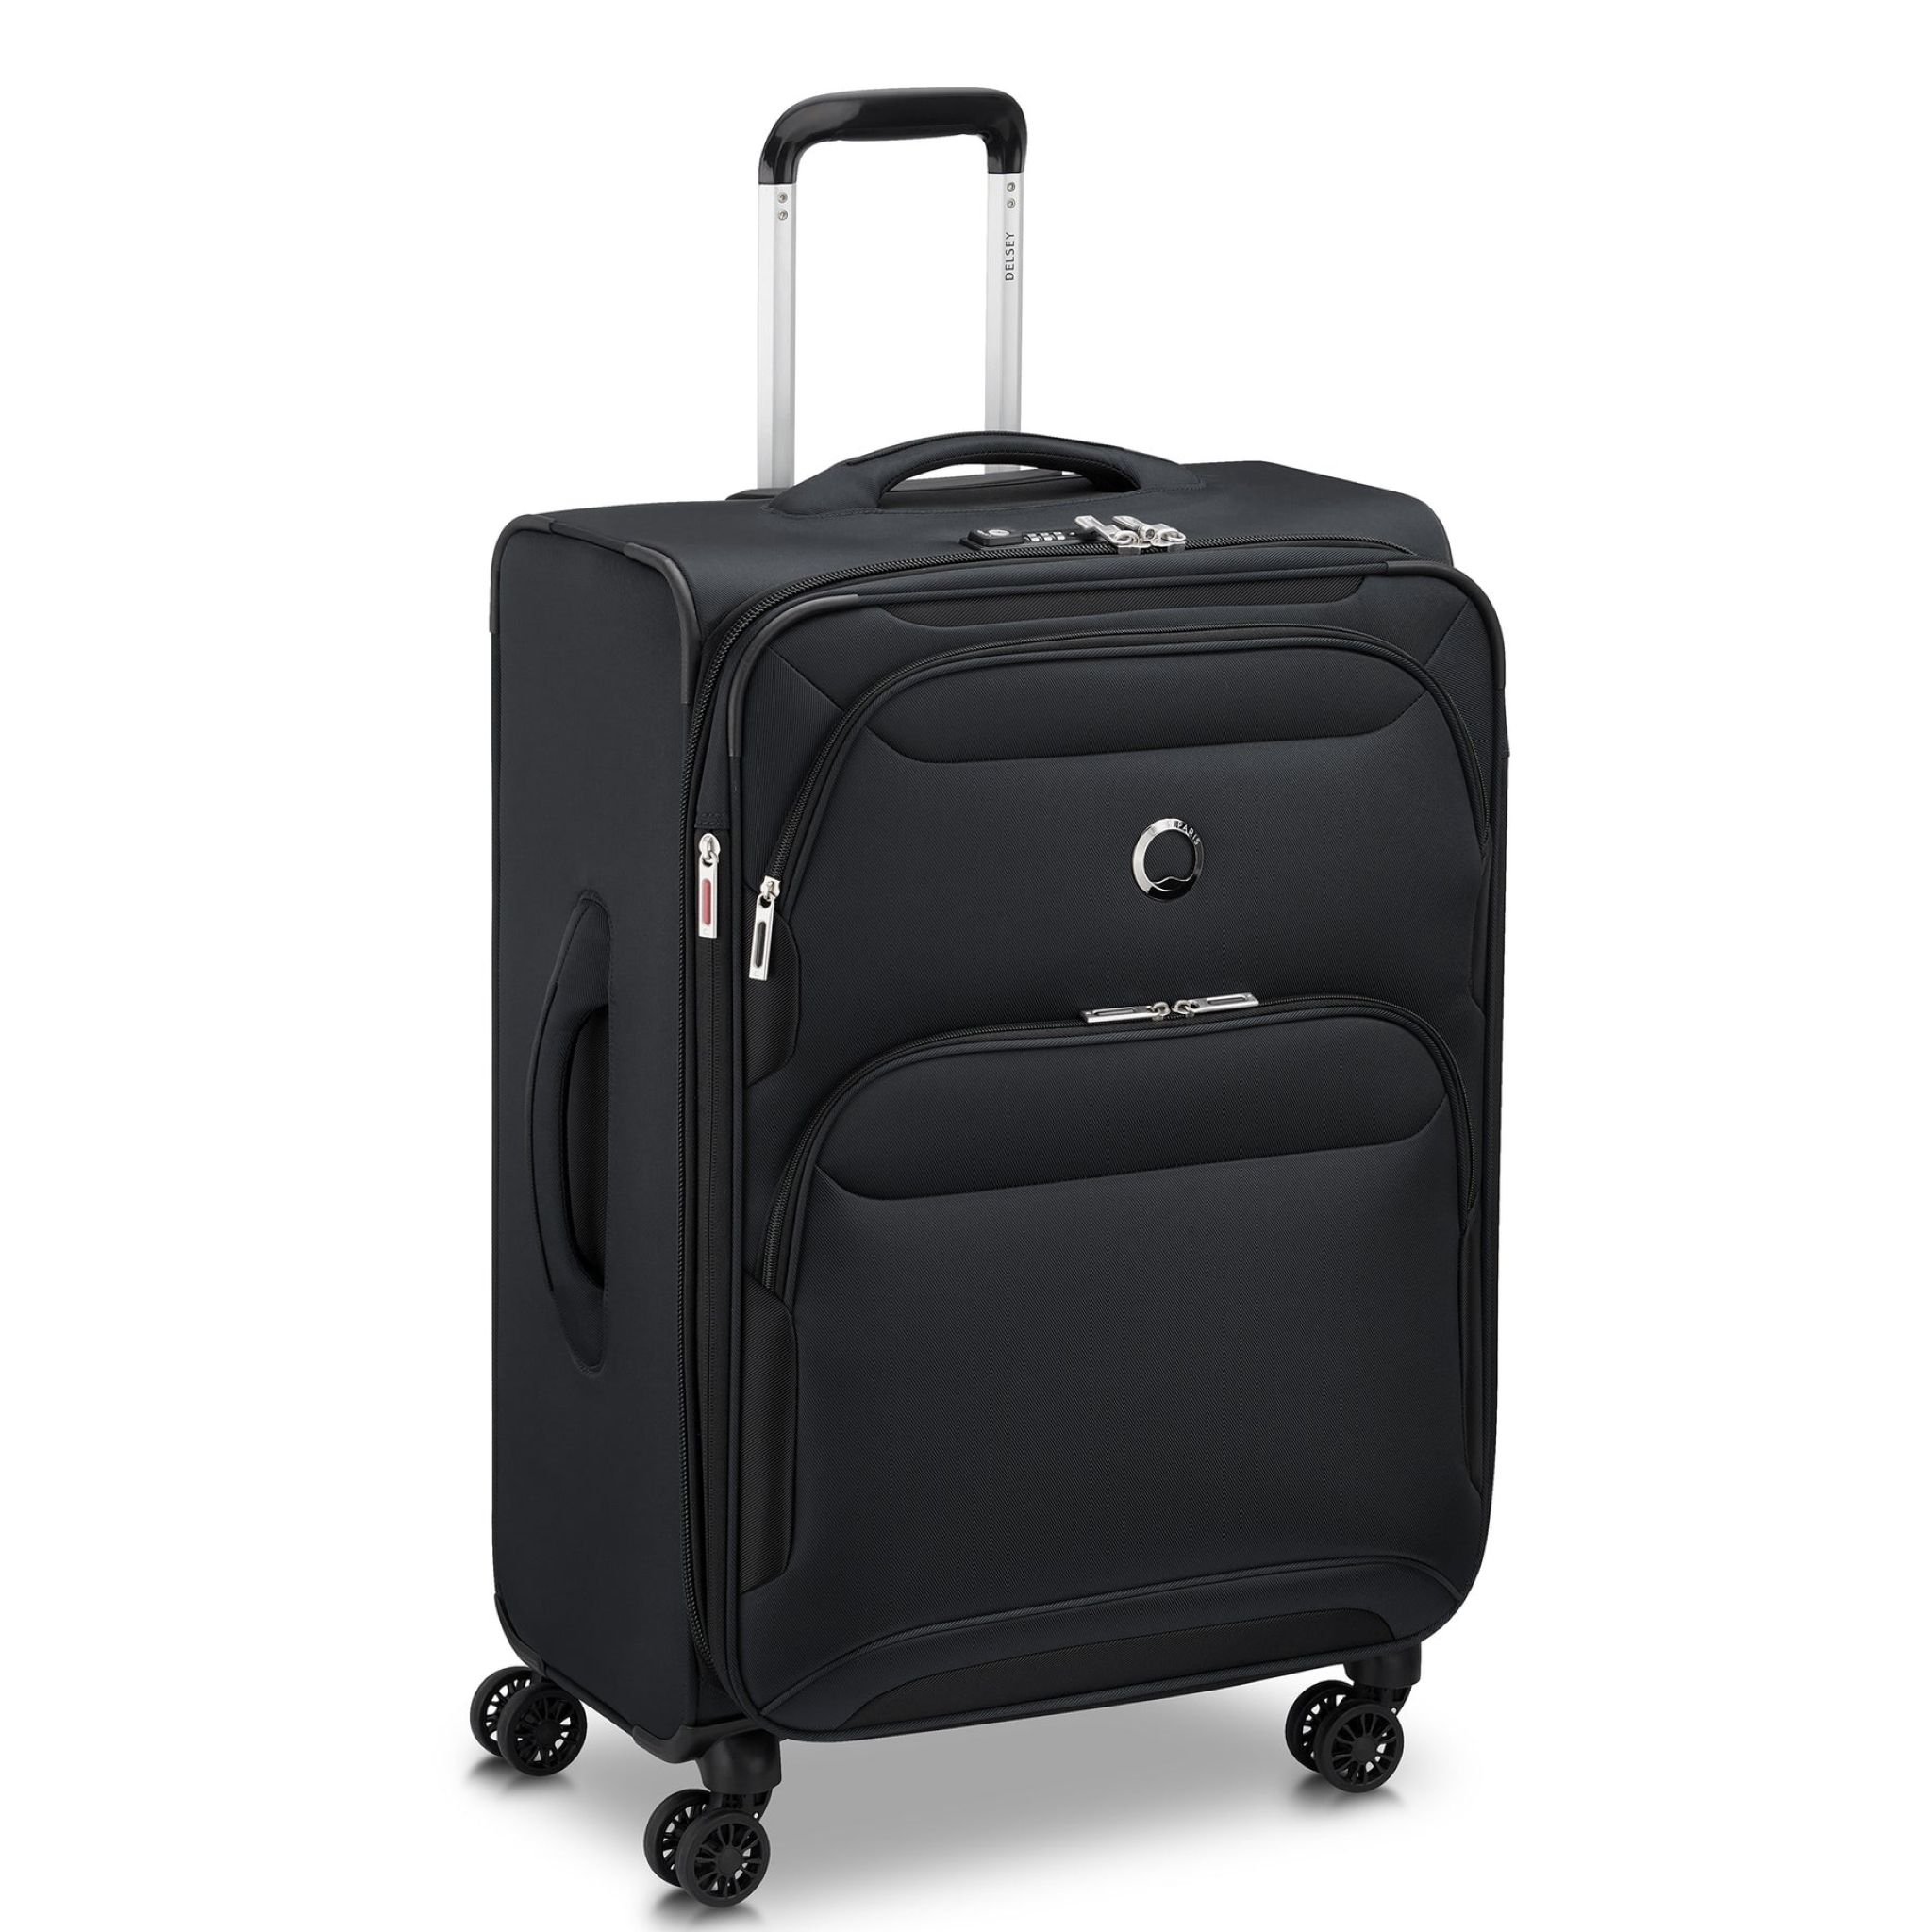 Skybags Purple Shooting Star 69 360 Medium Trolley Suitcase Price in India,  Full Specifications & Offers | DTashion.com